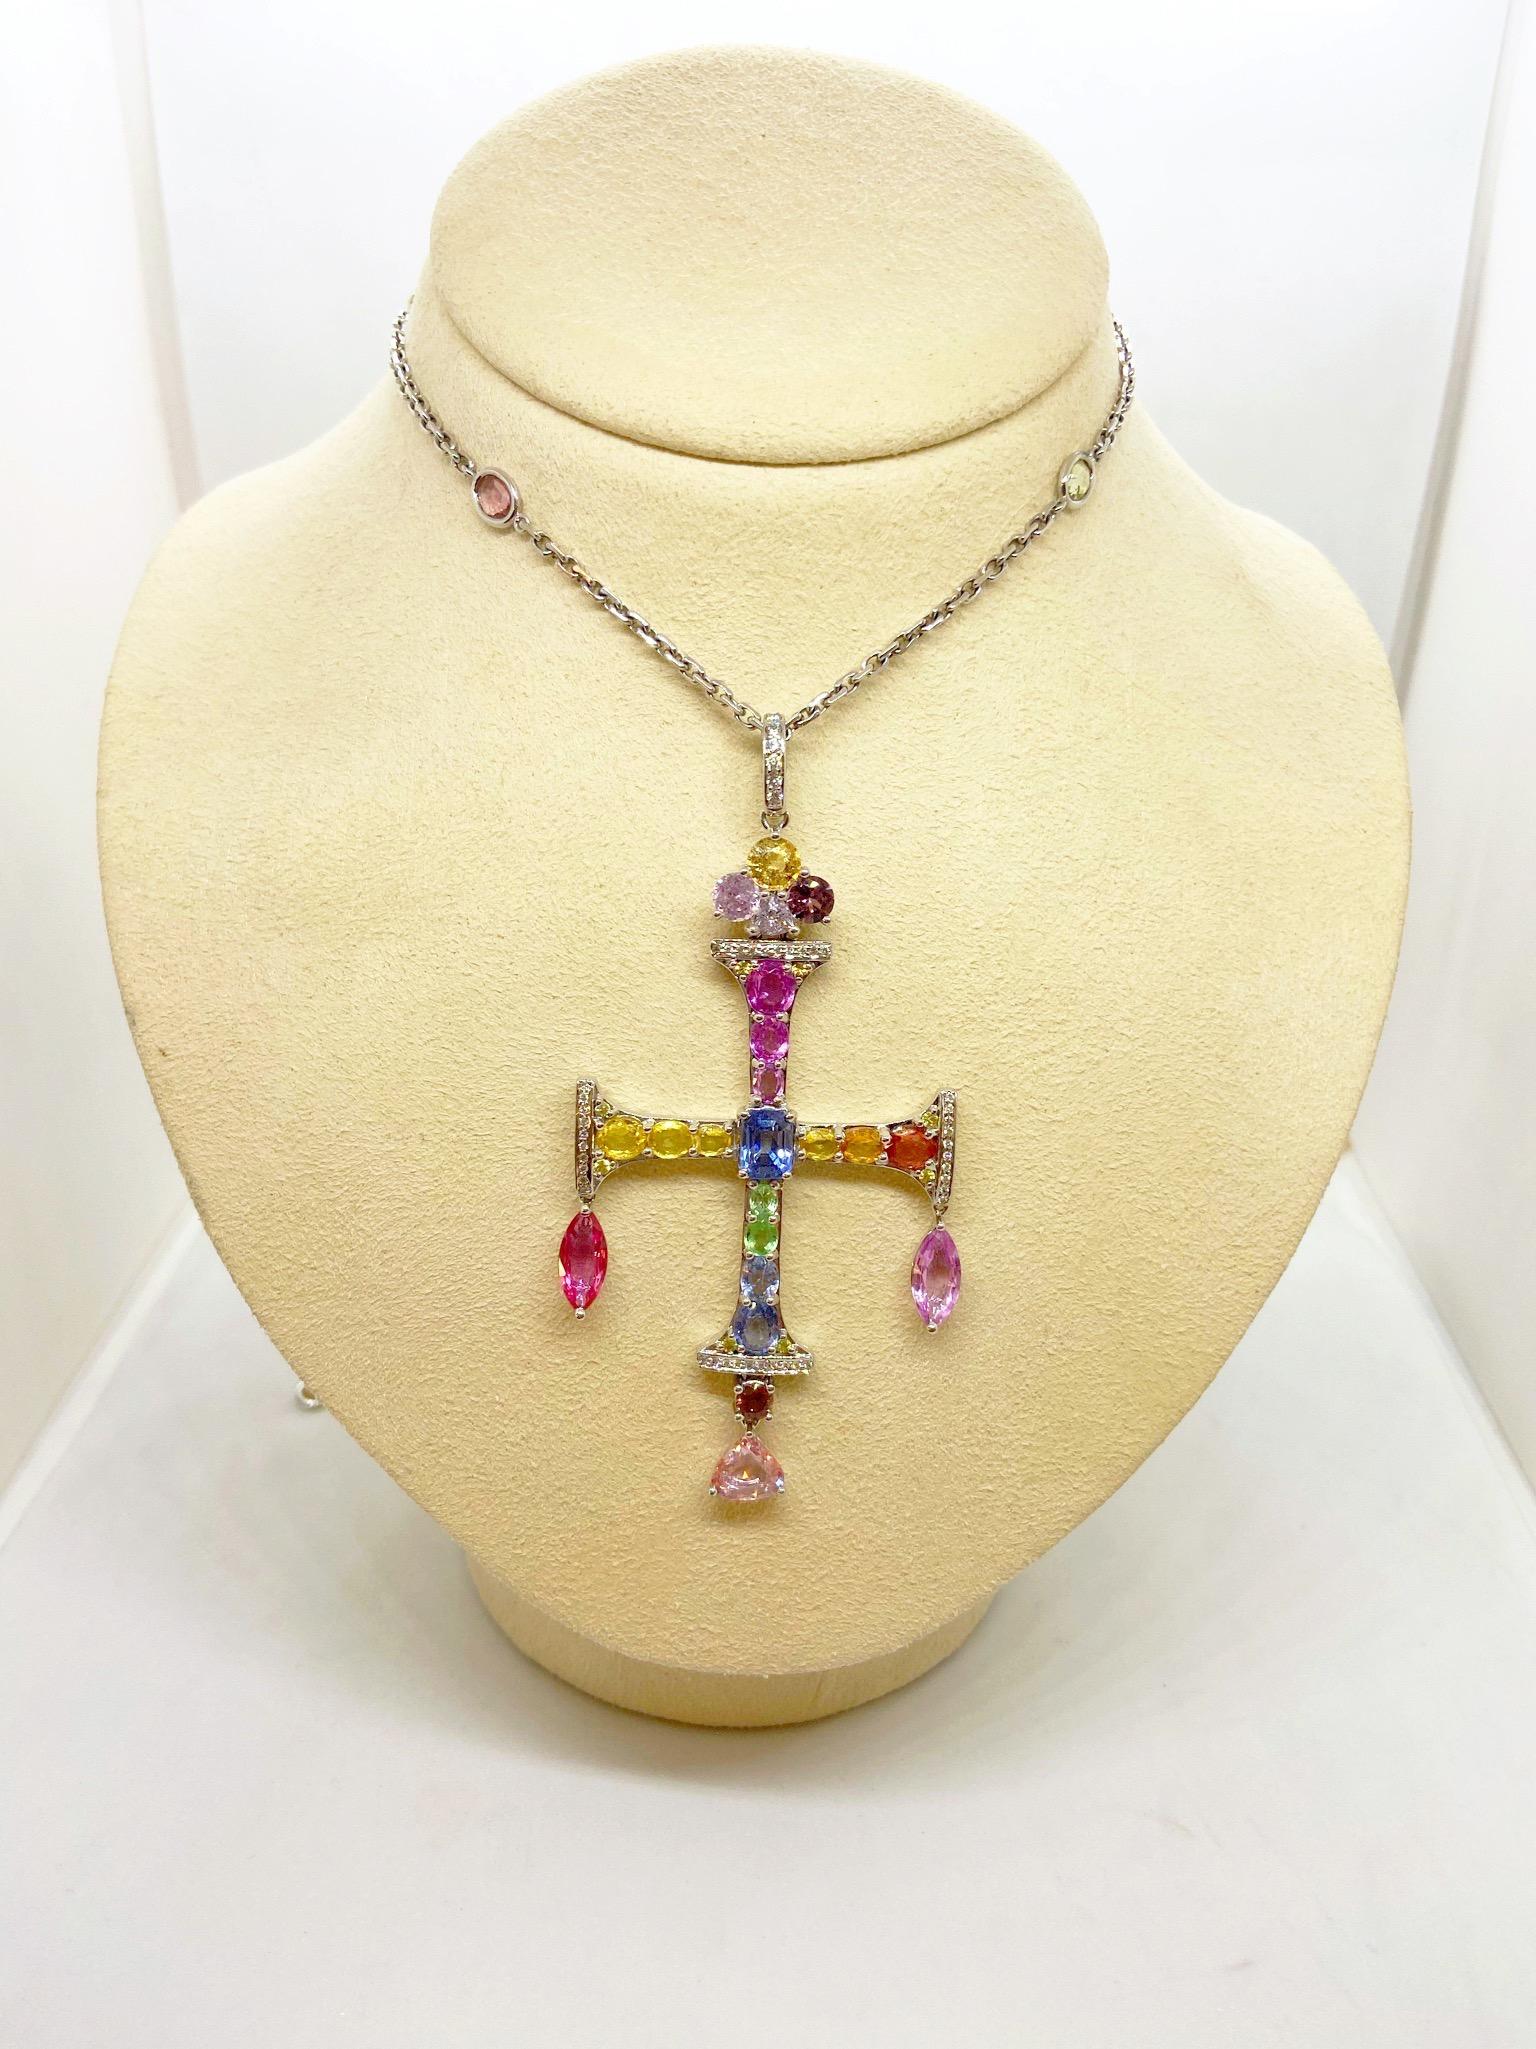 18 Karat White Gold Cross with Diamonds and 17.43 Carat Multicolored Sapphires For Sale 2